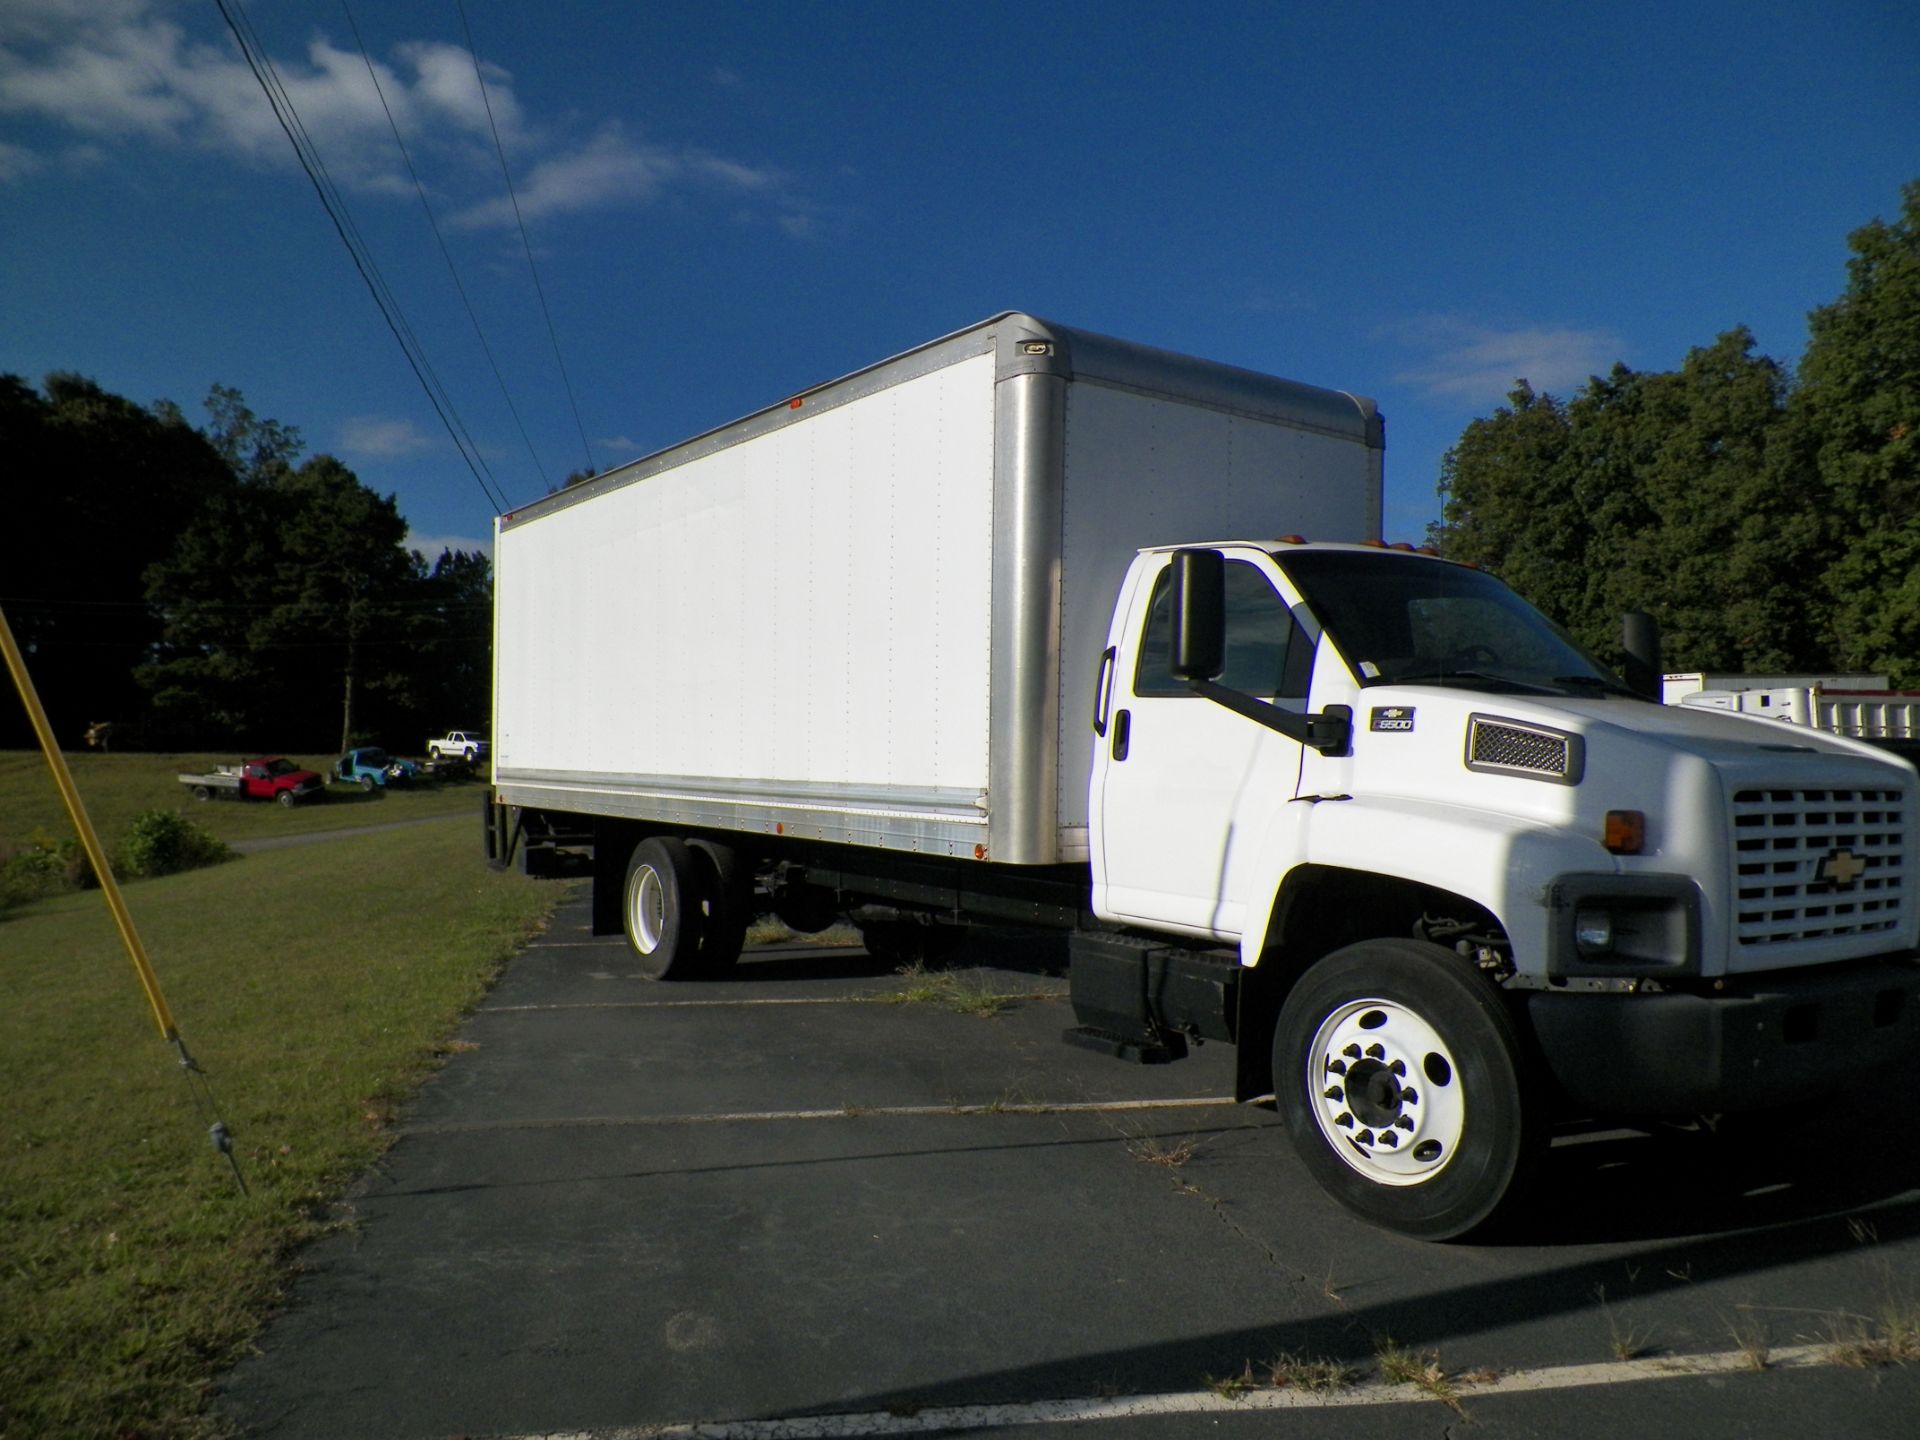 2004 c-6500 Chevrolet 24’ Box Truck with lift gate